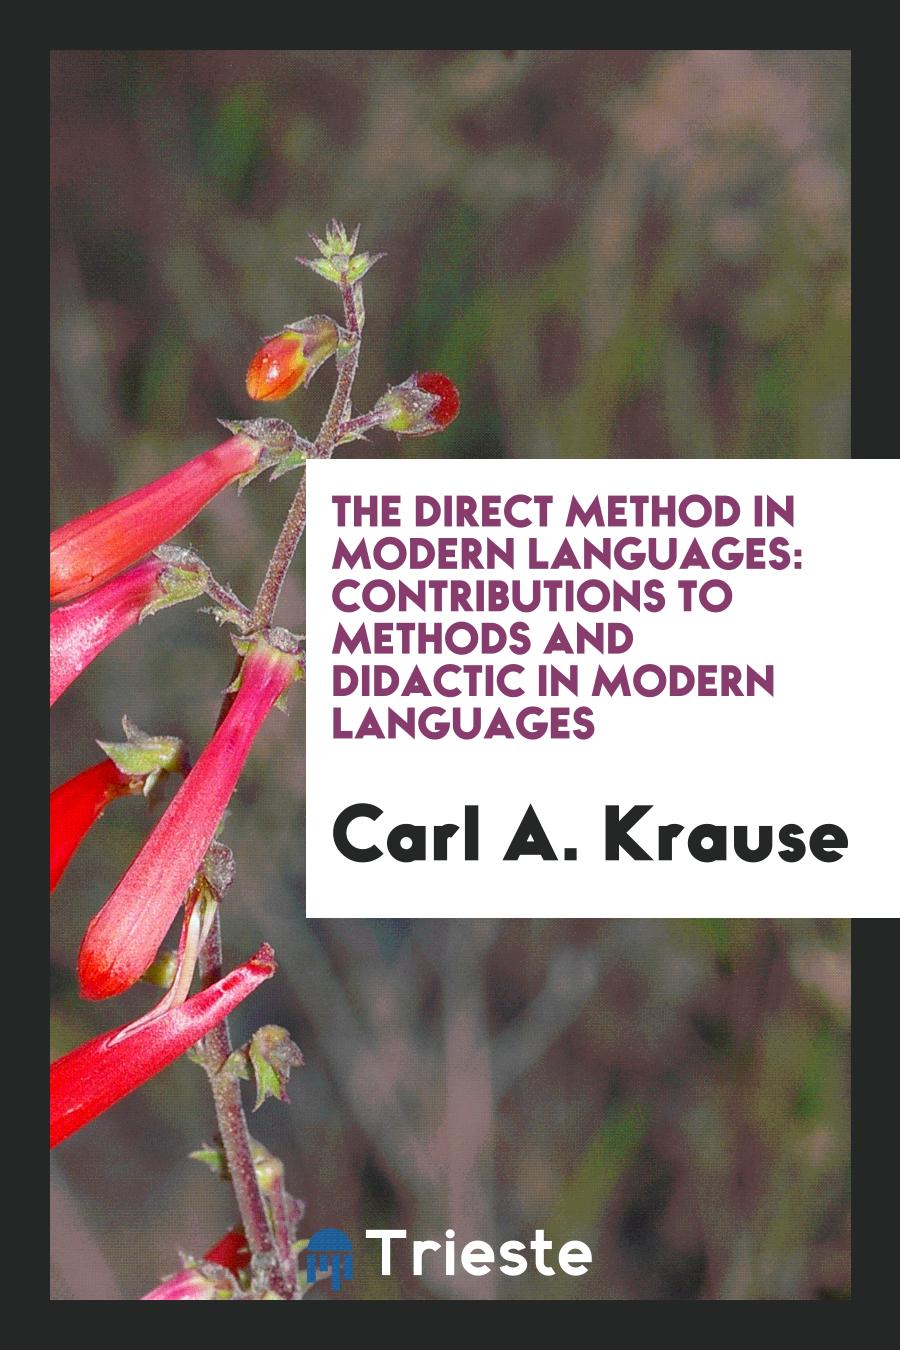 The Direct Method in Modern Languages: Contributions to Methods and Didactic in Modern Languages